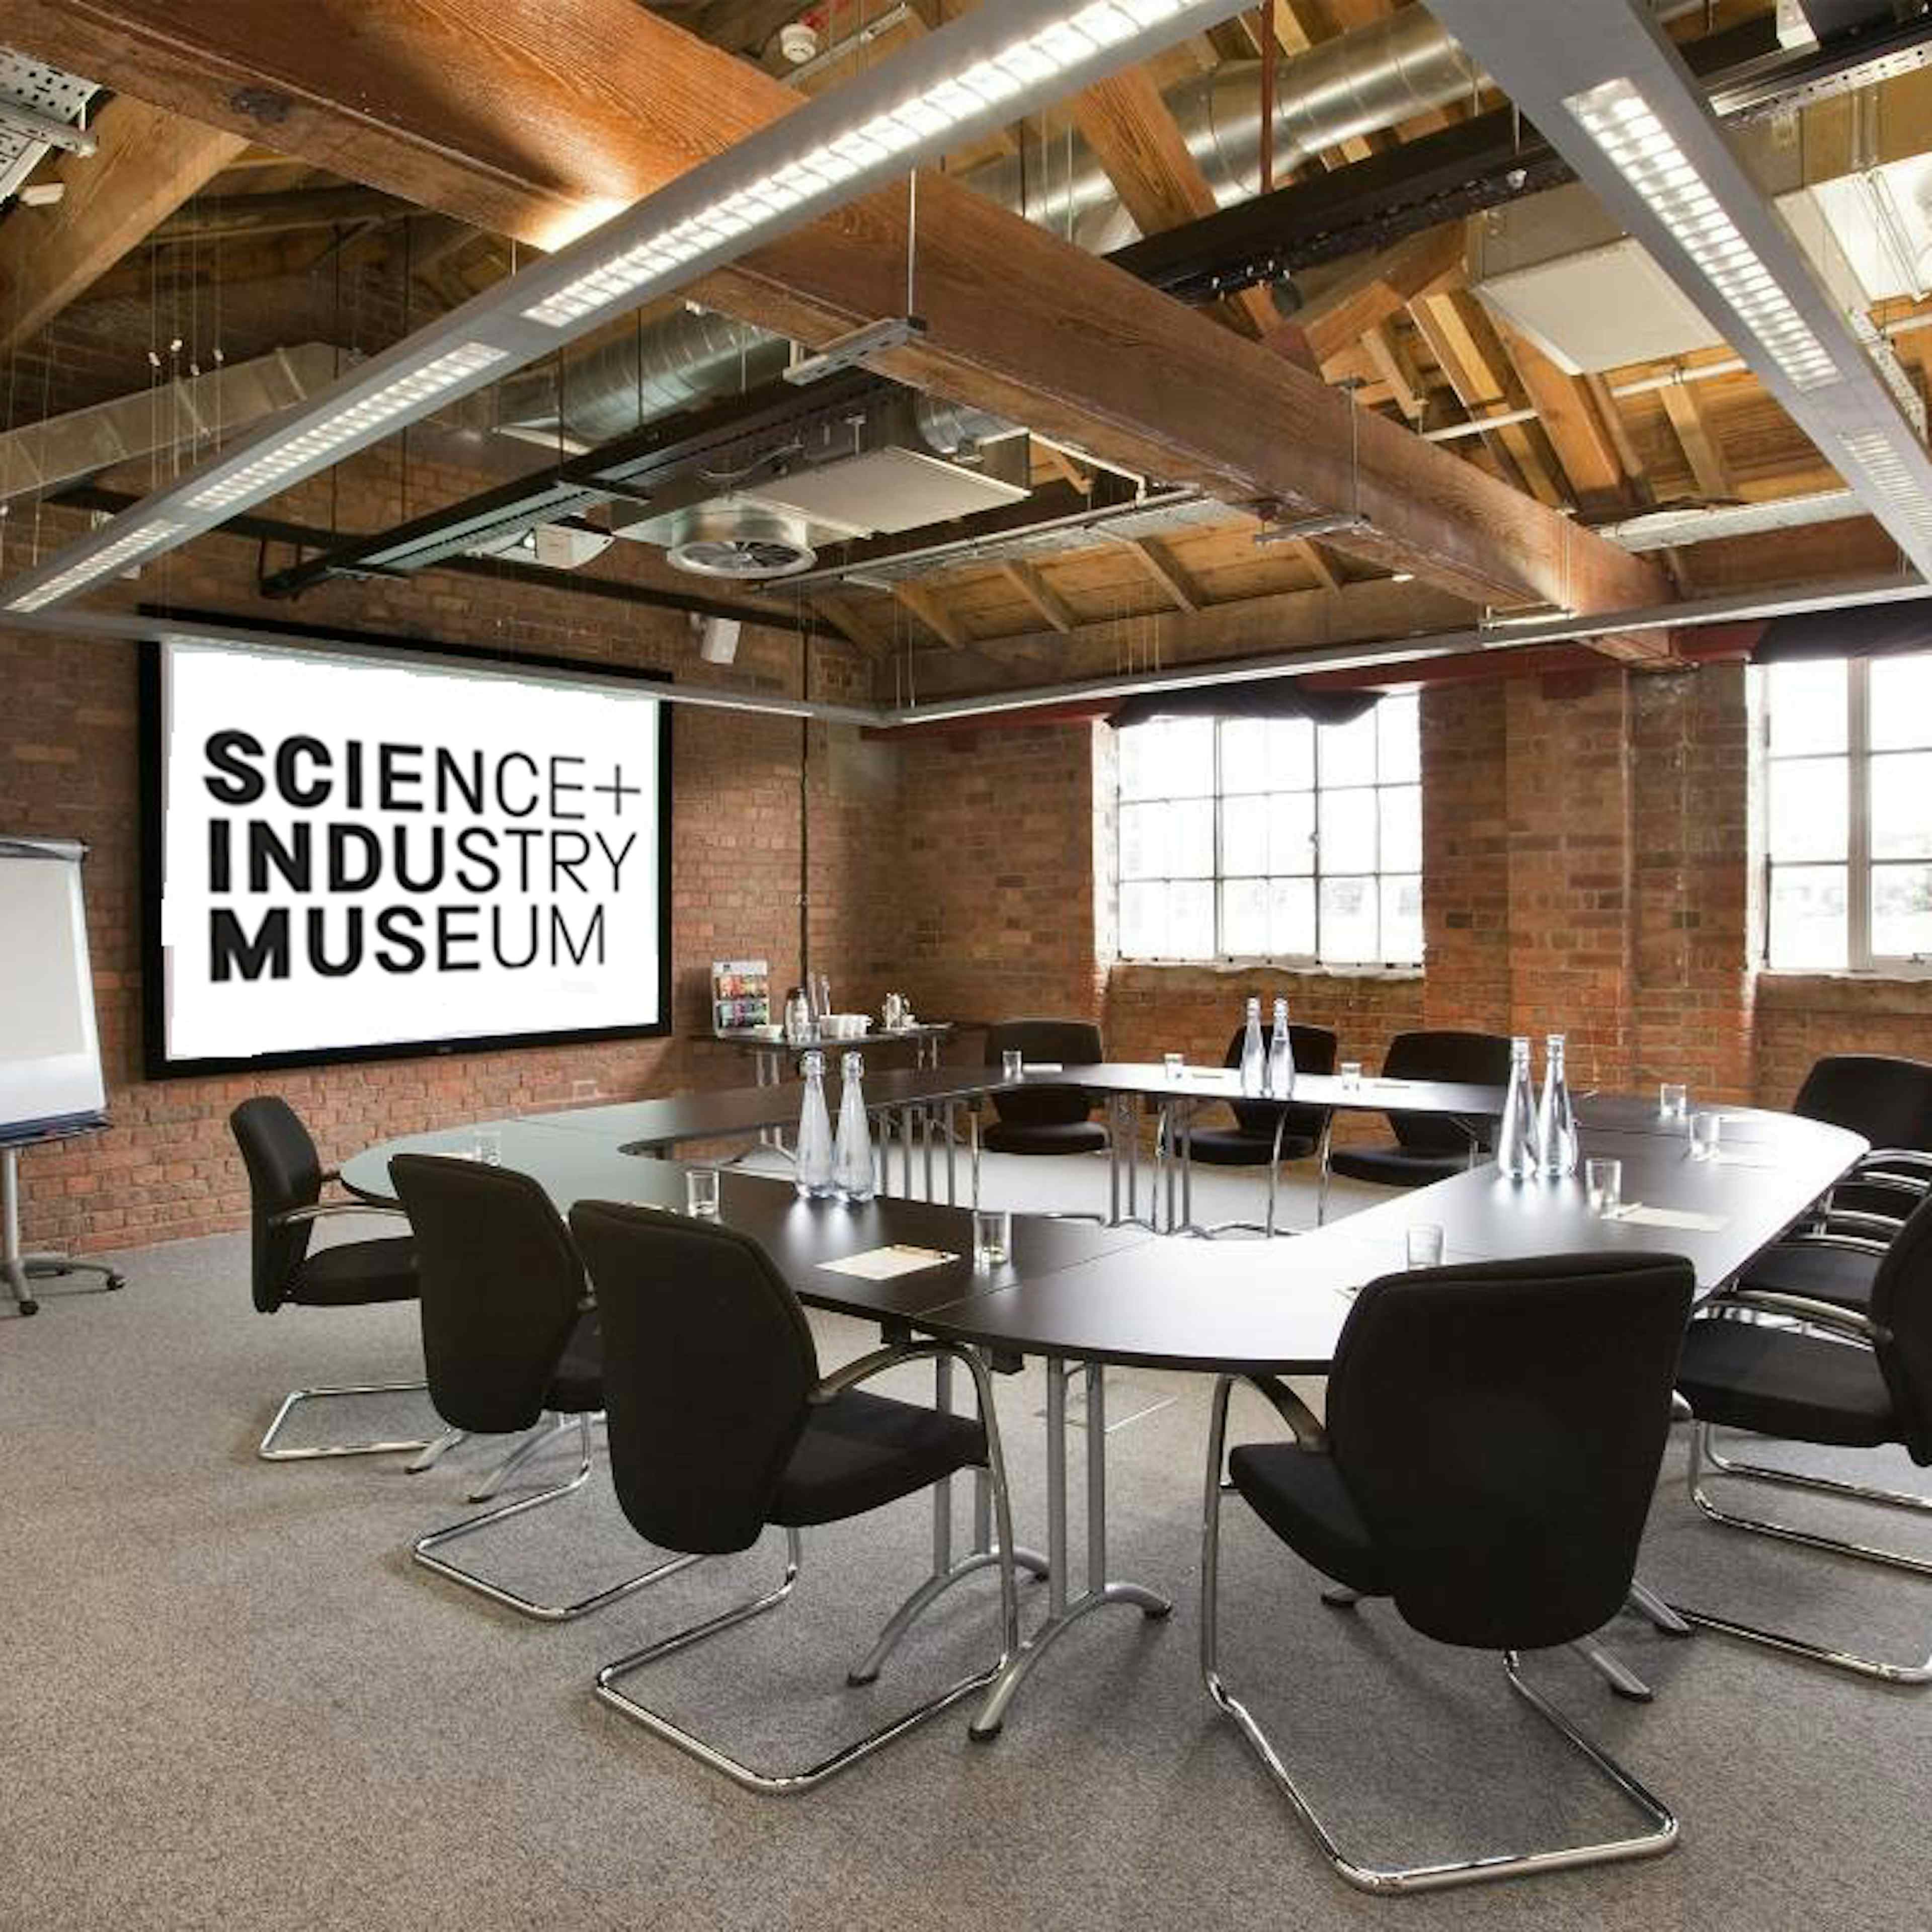 Science and Industry Museum - Dalton Suite image 1